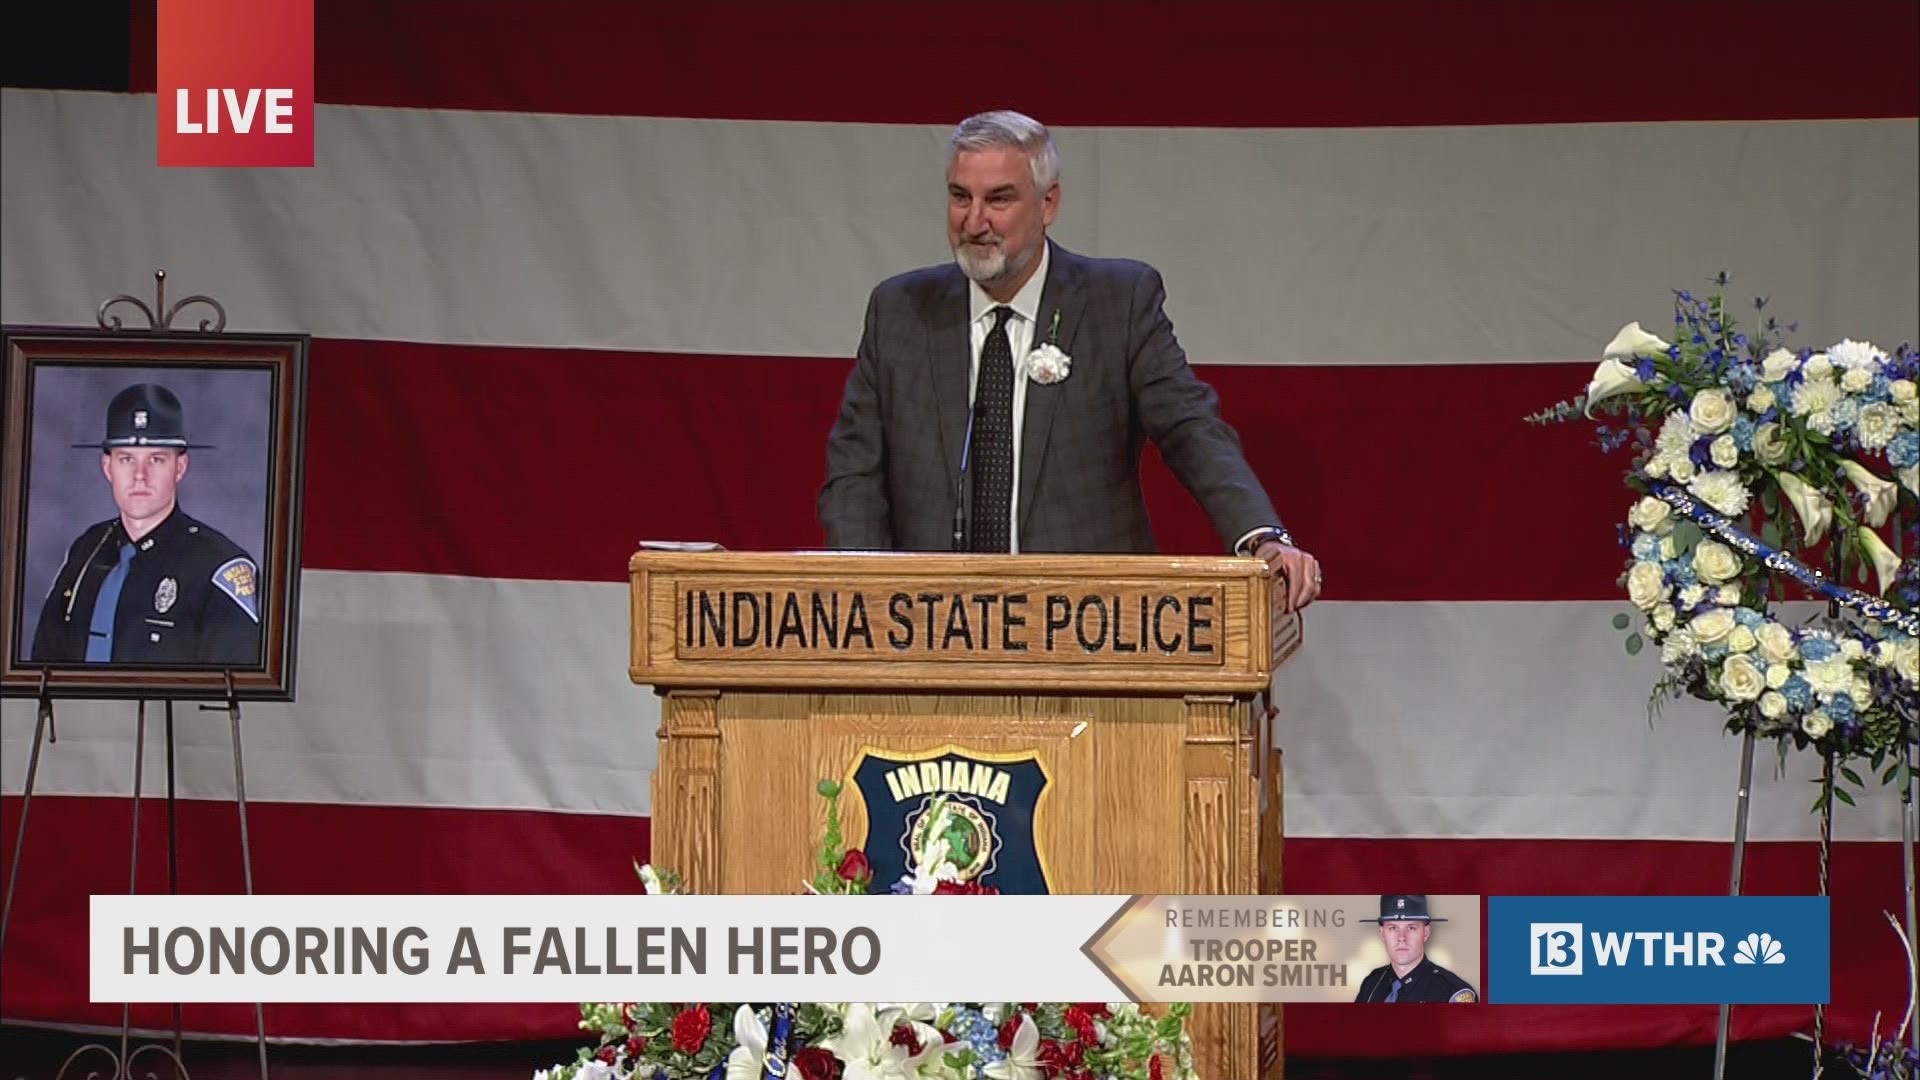 Indiana Gov. Eric Holcomb honors fallen ISP Trooper Aaron Smith at his funeral service.